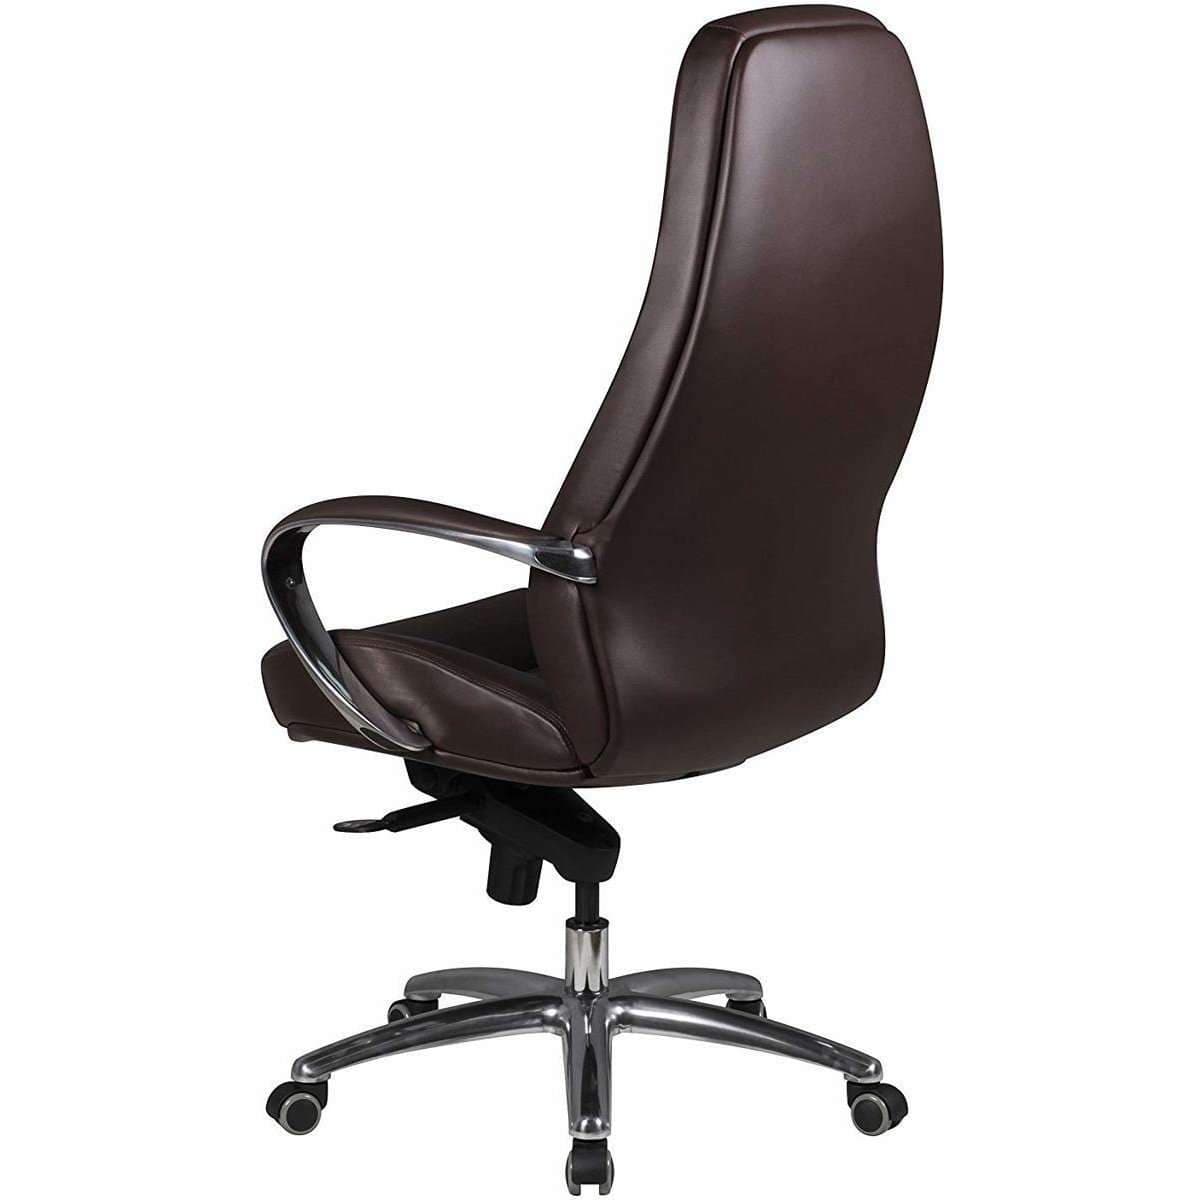 Nancy's Baychester Leather Office Chair Brown - Swivel office chair leather - Office chair leather - Executive chair leather